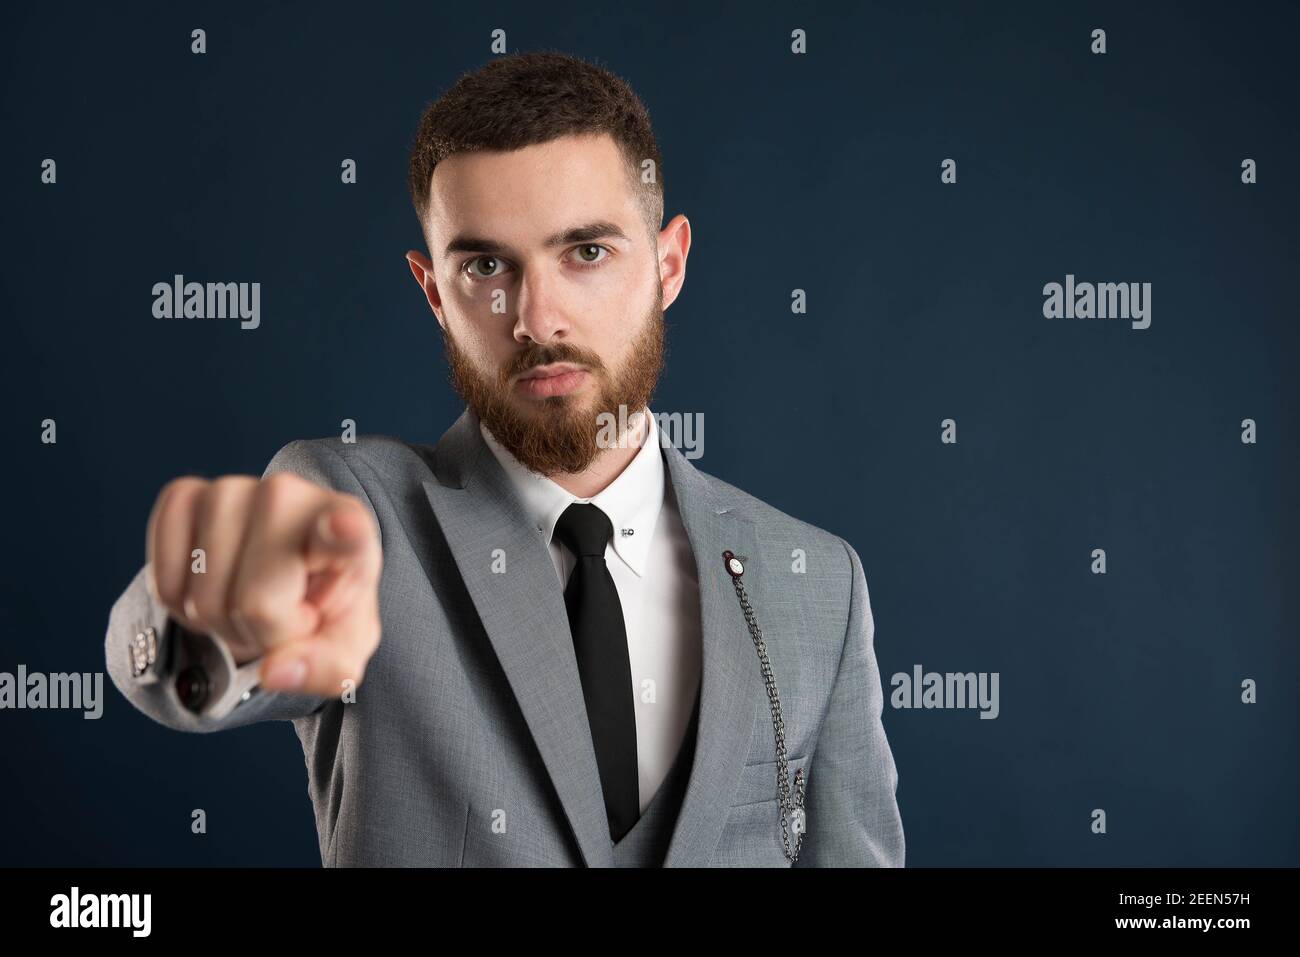 Serious young businessman pointing at you wearing a grey suit and black tie Stock Photo